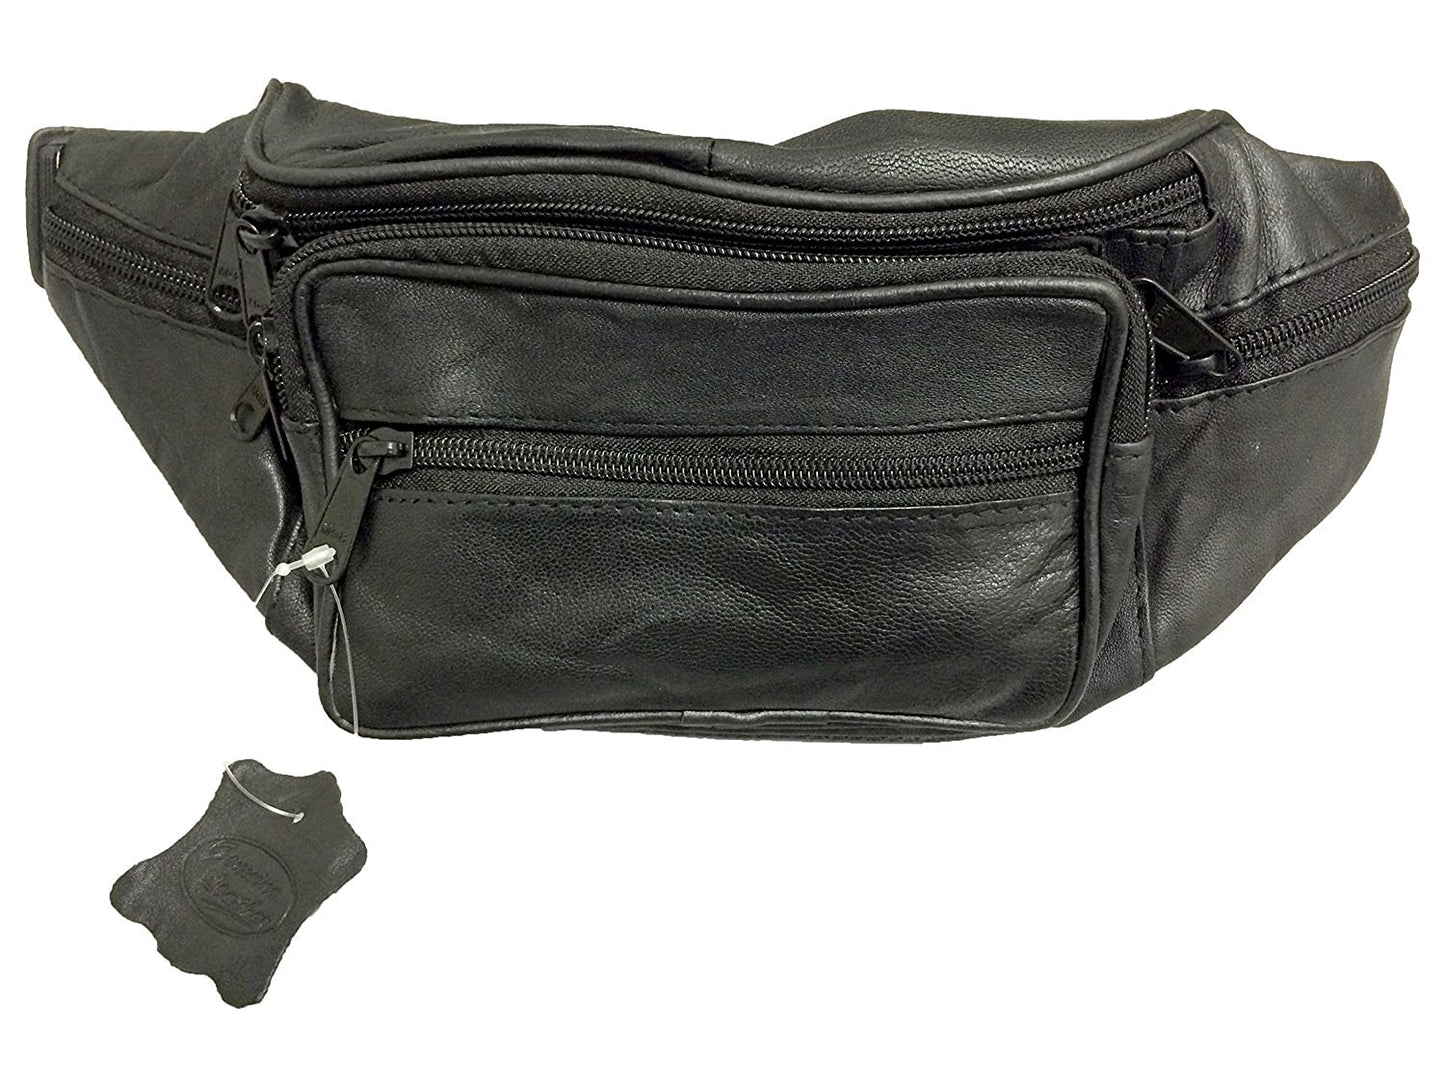 Multiple Pocket Genuine Solid (not patch) Leather Waist Pack, Fanny Pack. Large adjustable strap up to 45" Features a fold away mesh water bottle holder